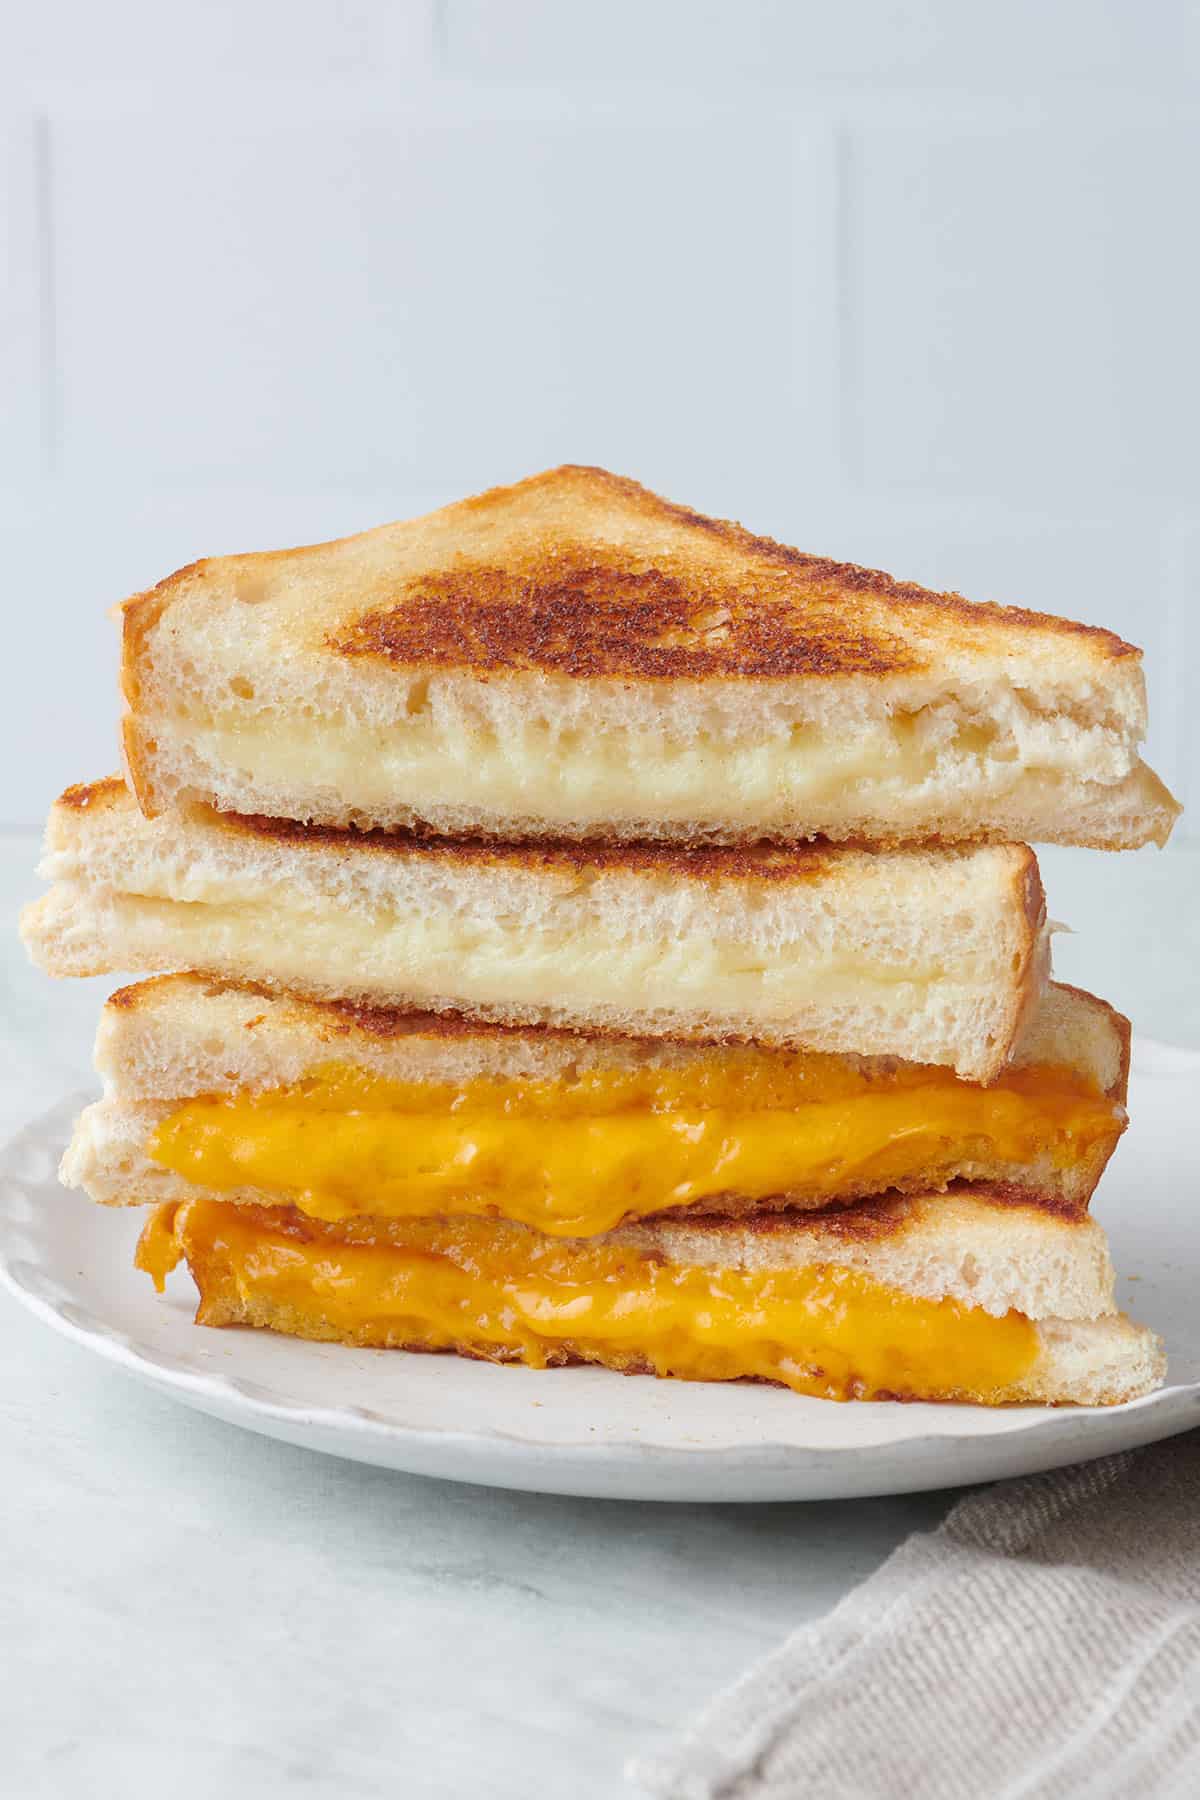 Grilled cheese halves stacked on top of each other on a plate.